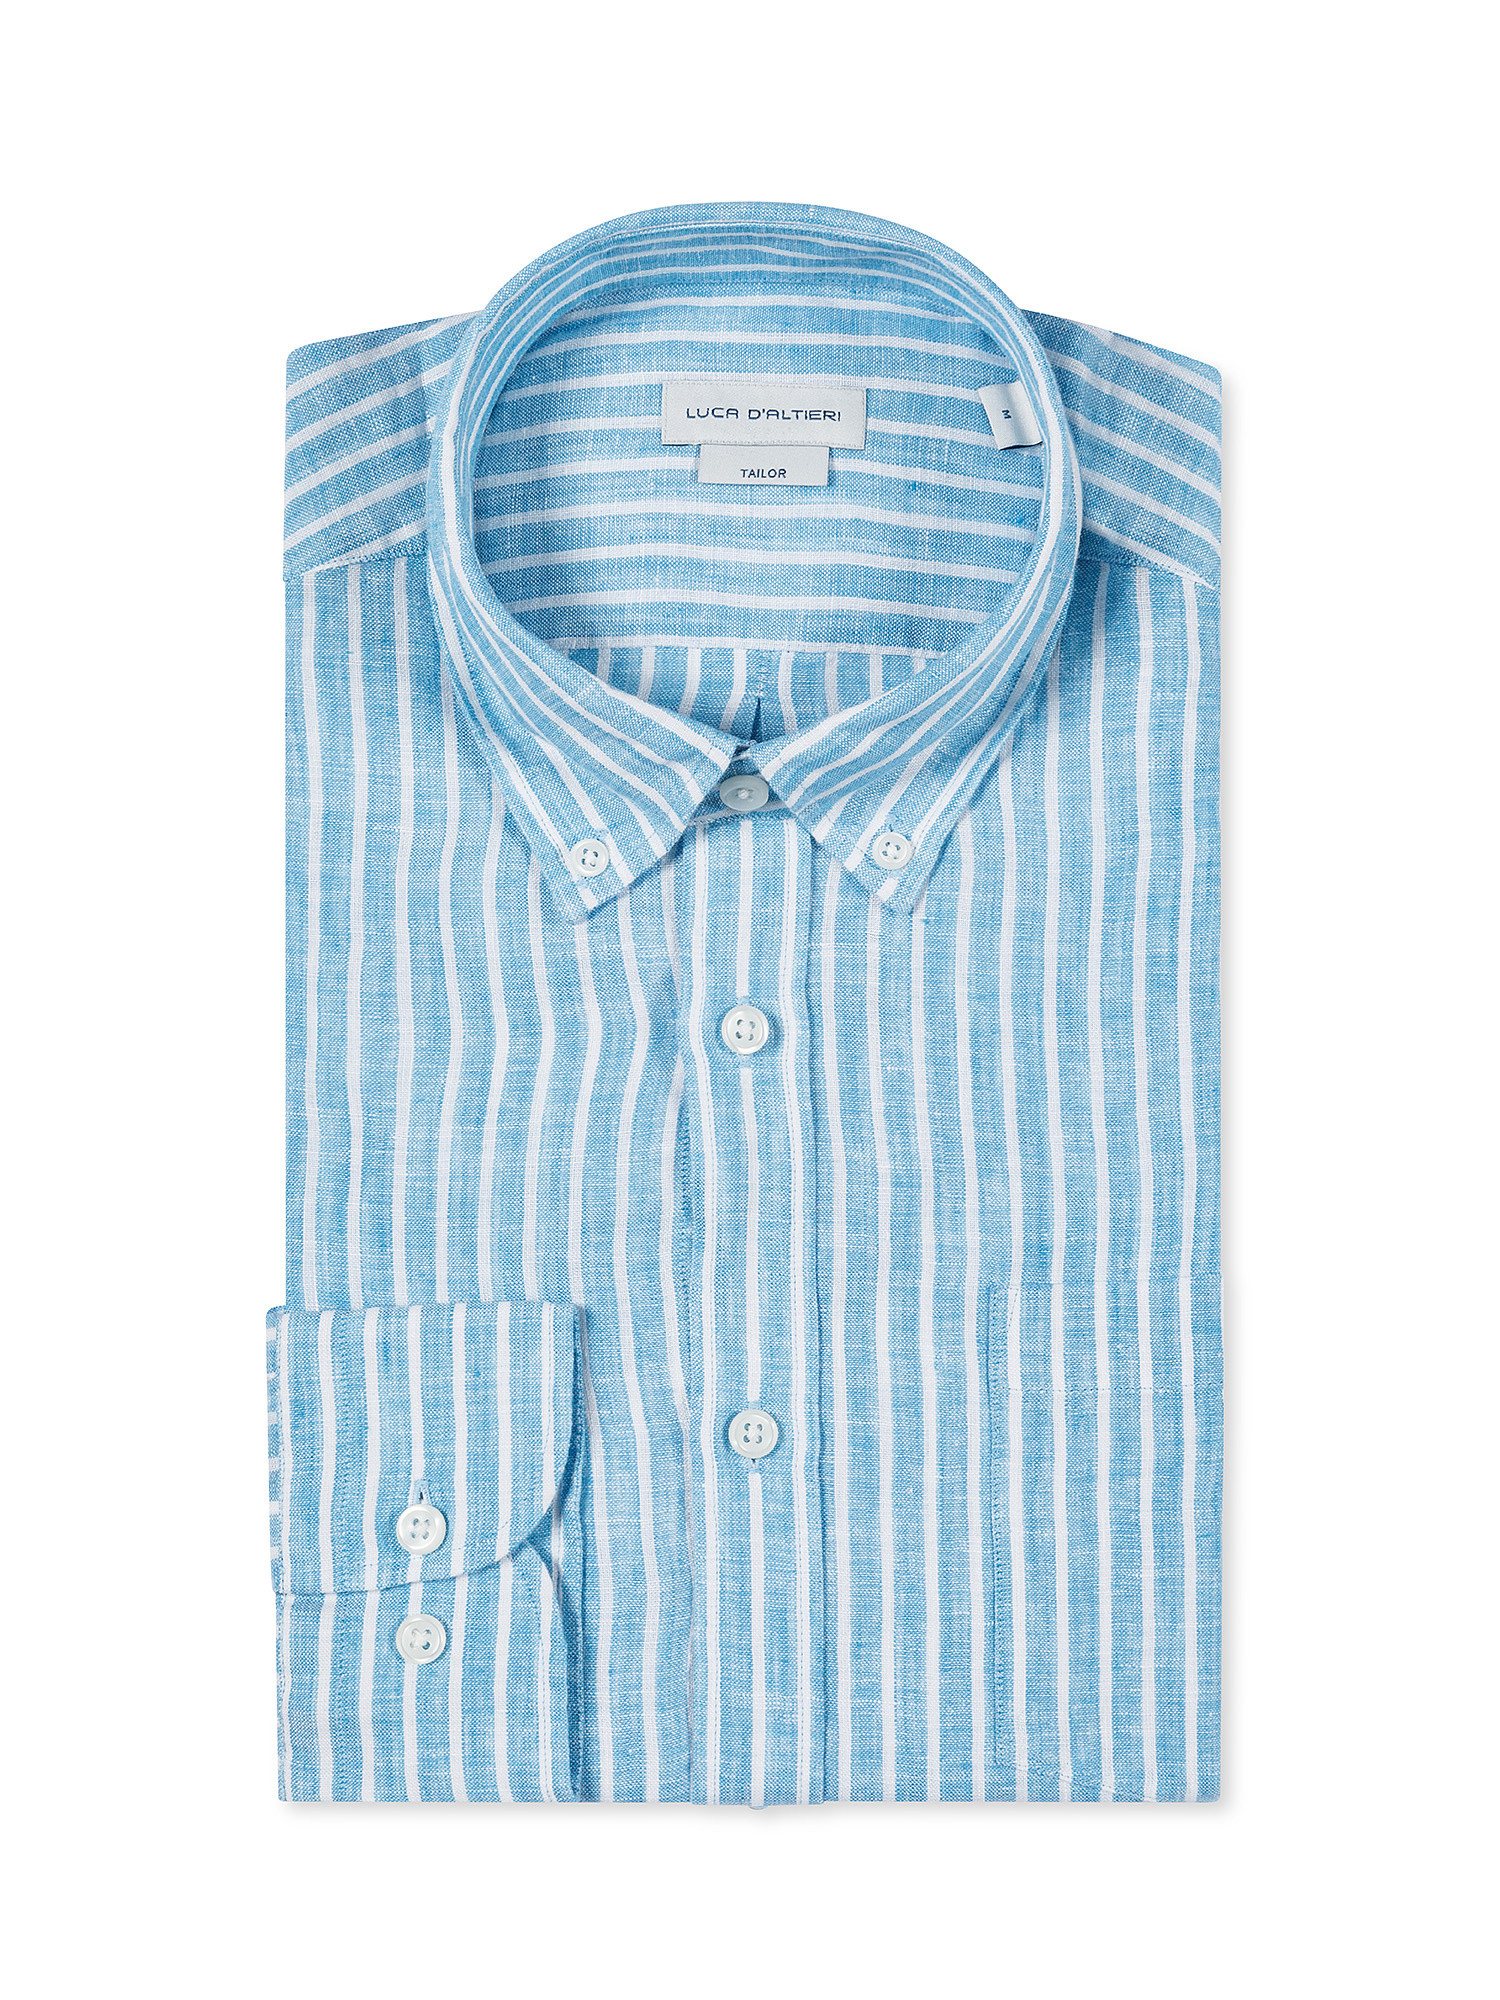 Luca D'Altieri - Tailor fit shirt in pure linen, Turquoise, large image number 2